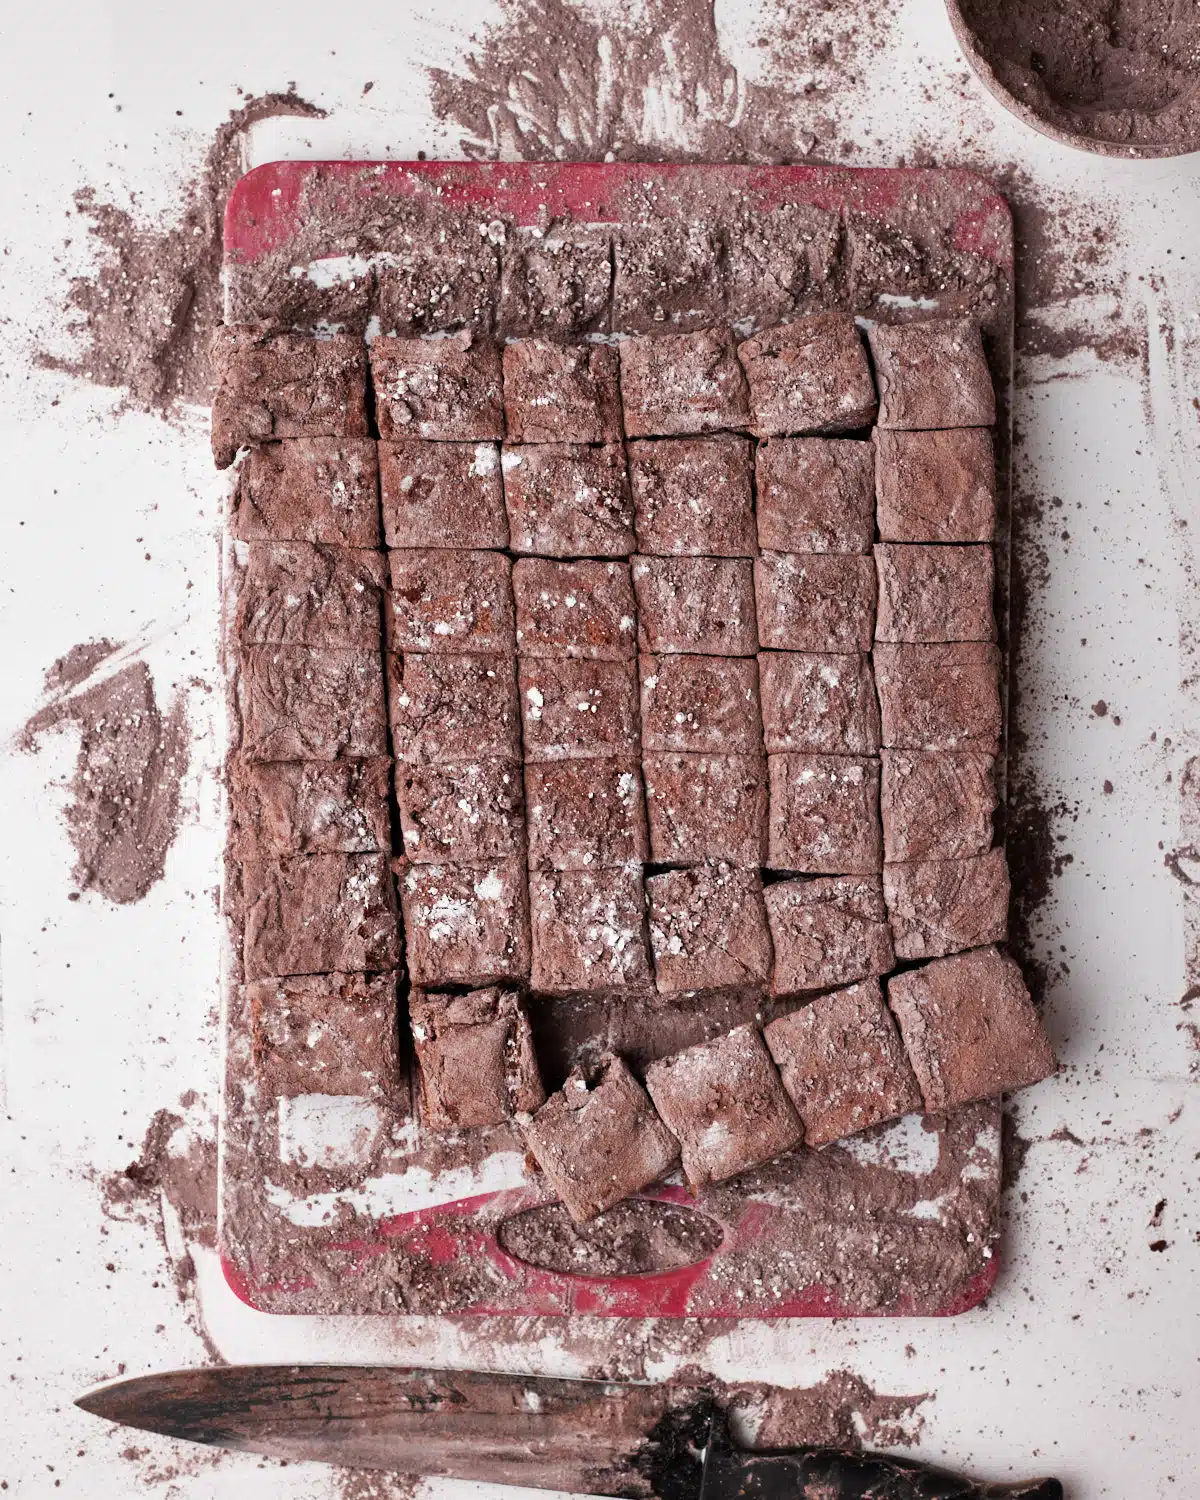 Cutting up chocolate marshmallows into squares